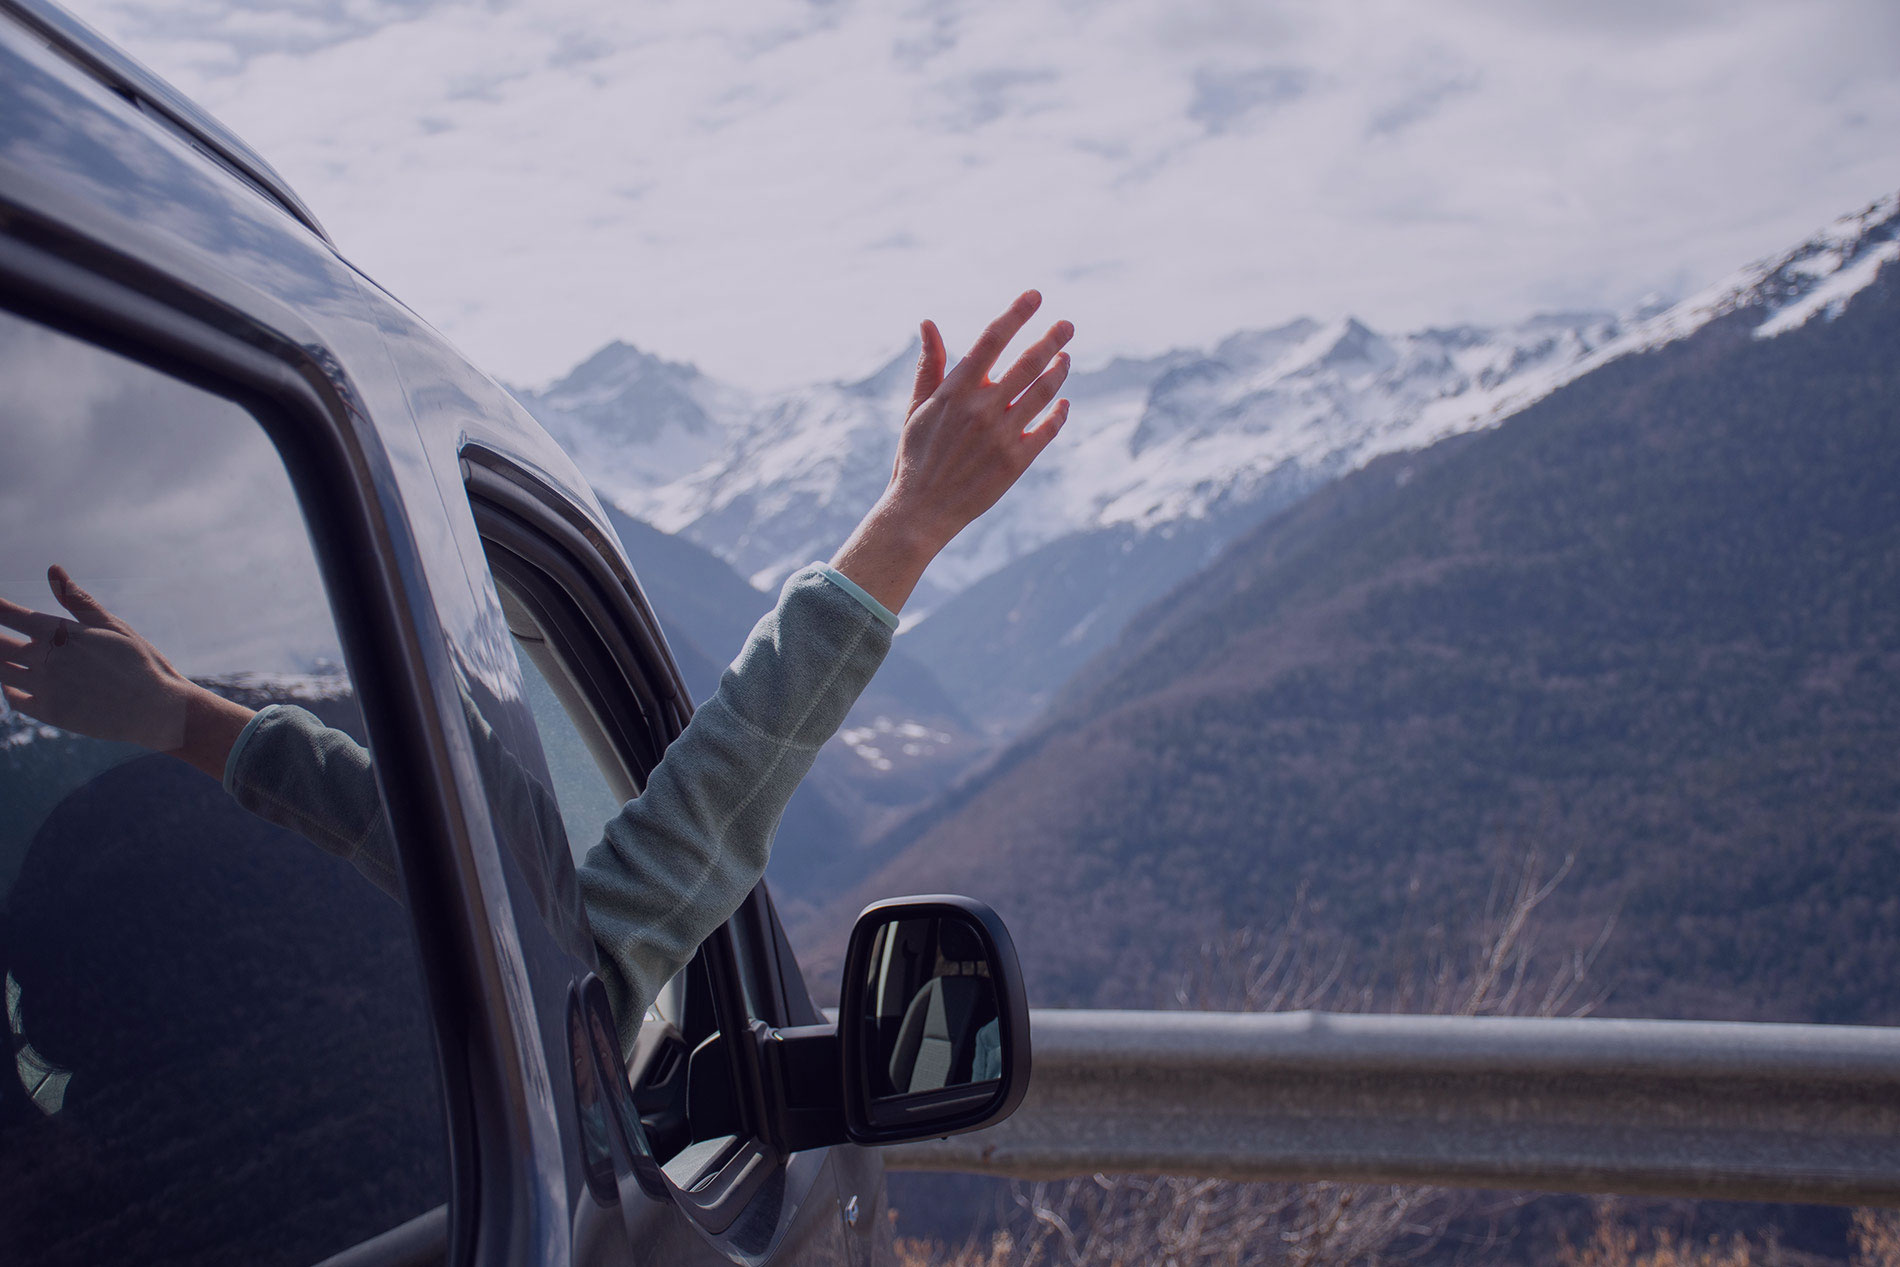 Hand raised out of a car window at a mountain viewpoint